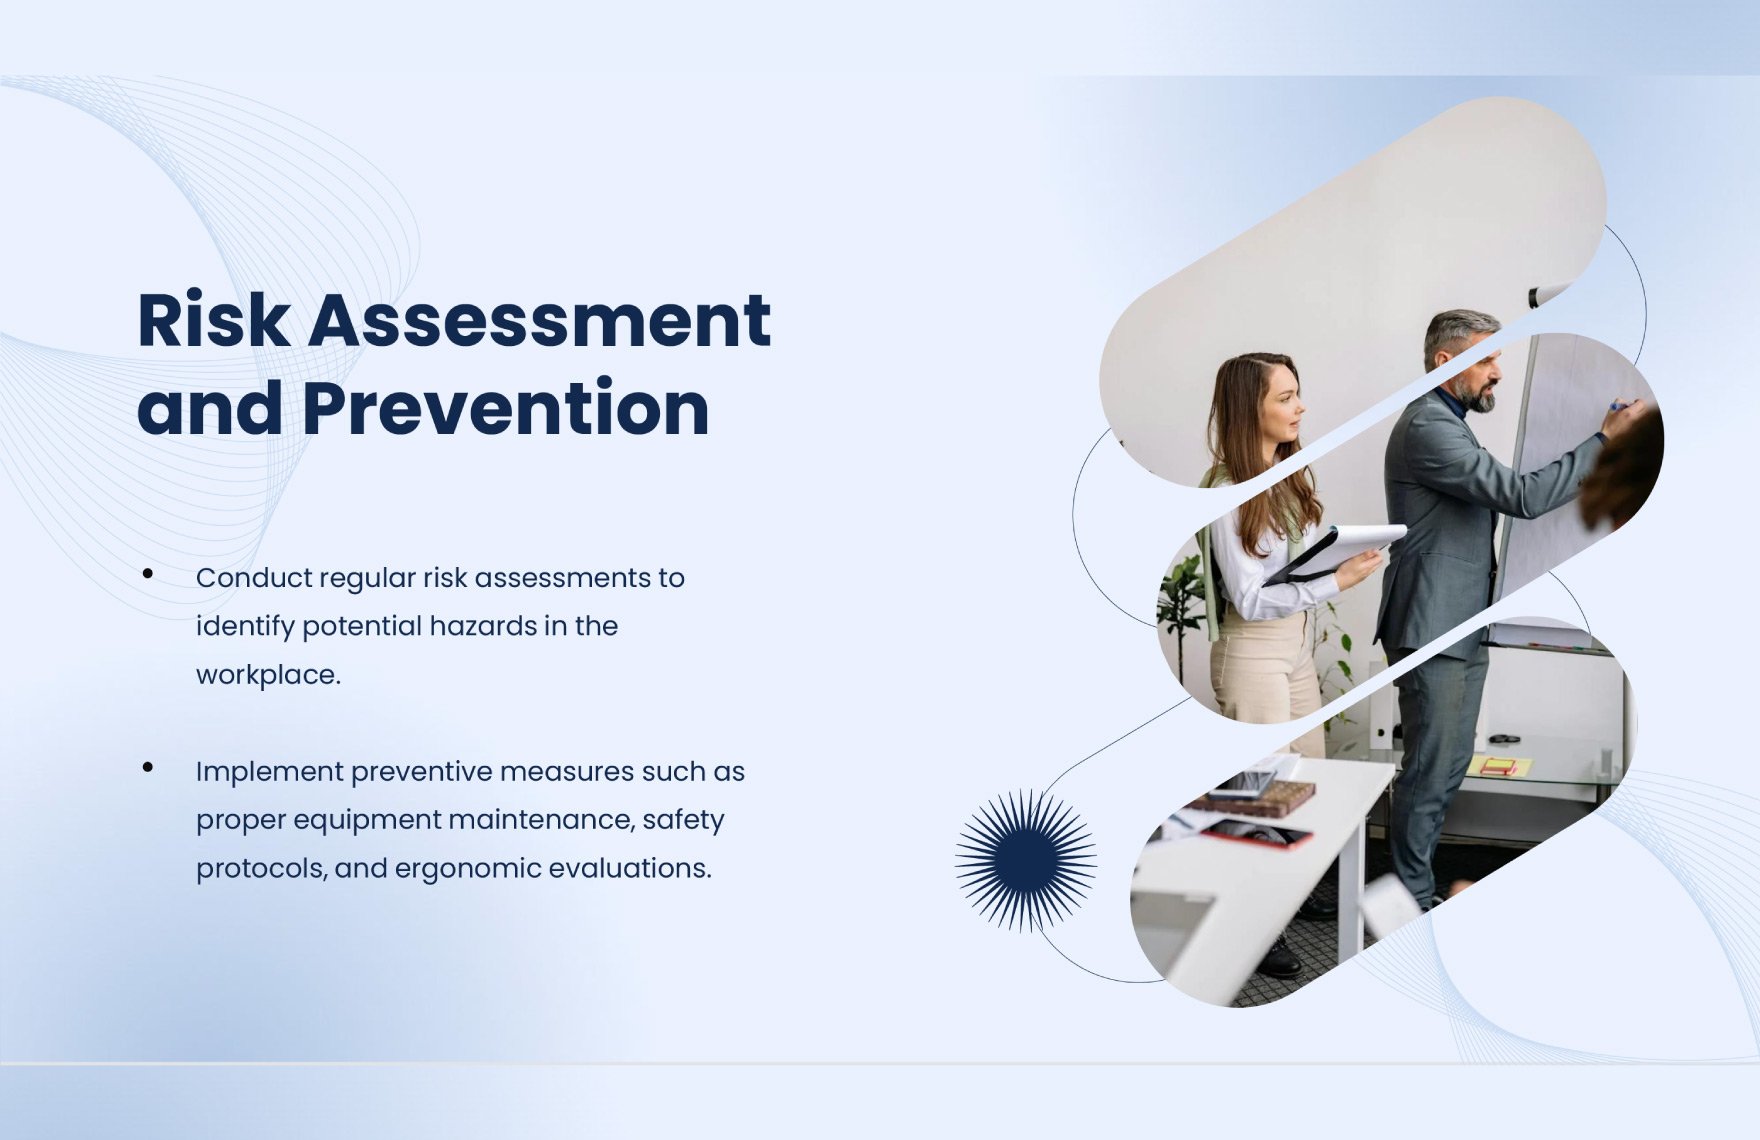 Employee Health and Safety PPT Template